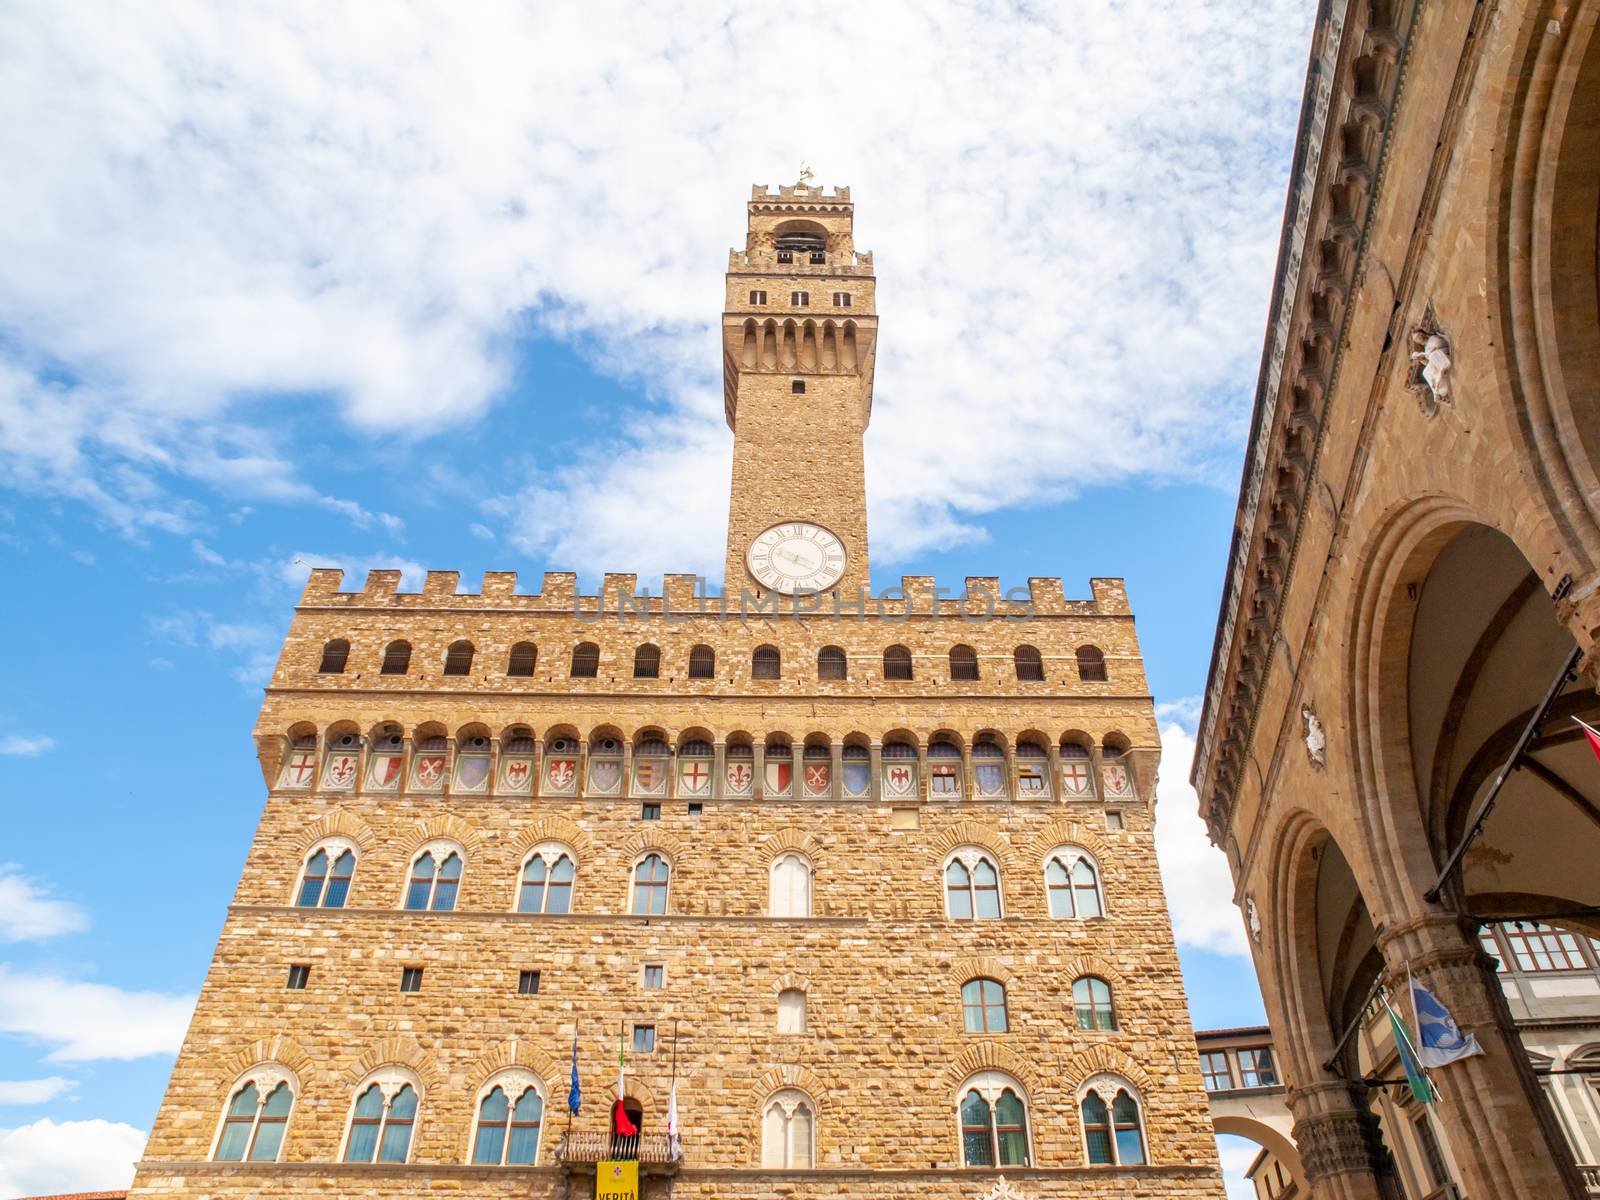 Bottom view of Pallazo Vecchio, Old Palace - Town Hall, with high bell tower, Piazza della Signoria, Florence, Tuscany, Italy by pyty